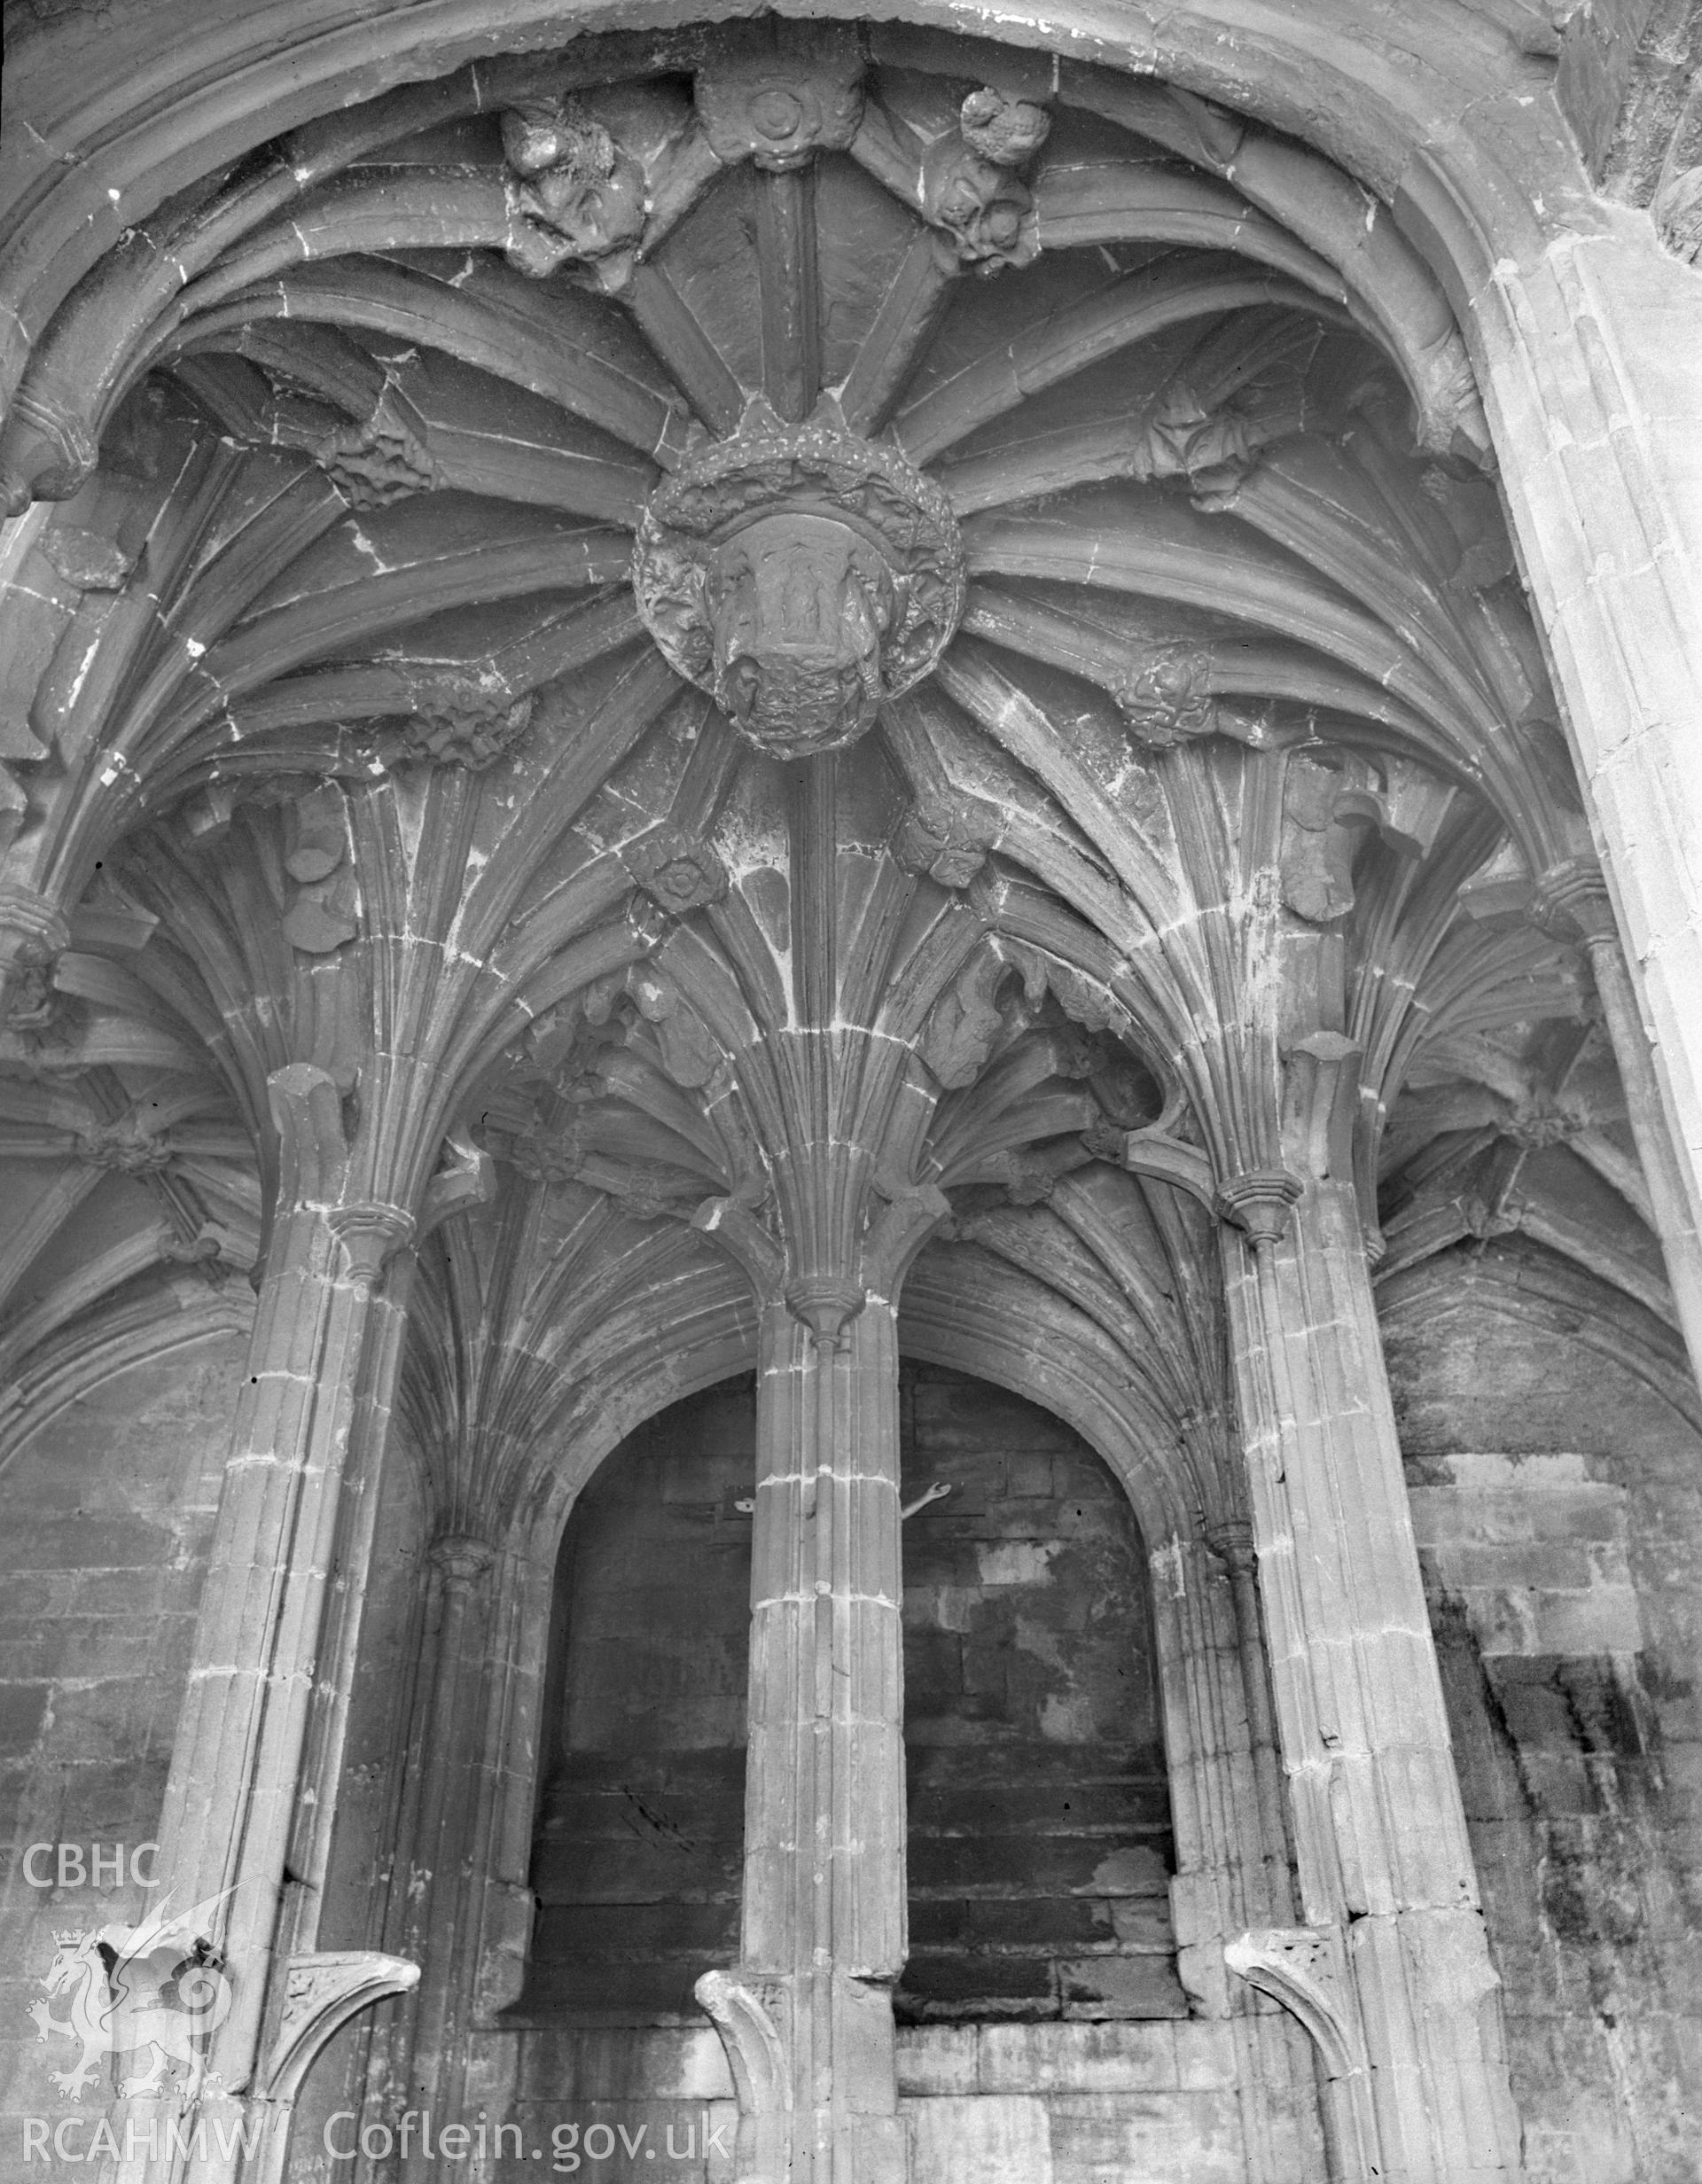 Interior view of vaulting over St Winifred's Well, Holywell, taken 13.05.1942.